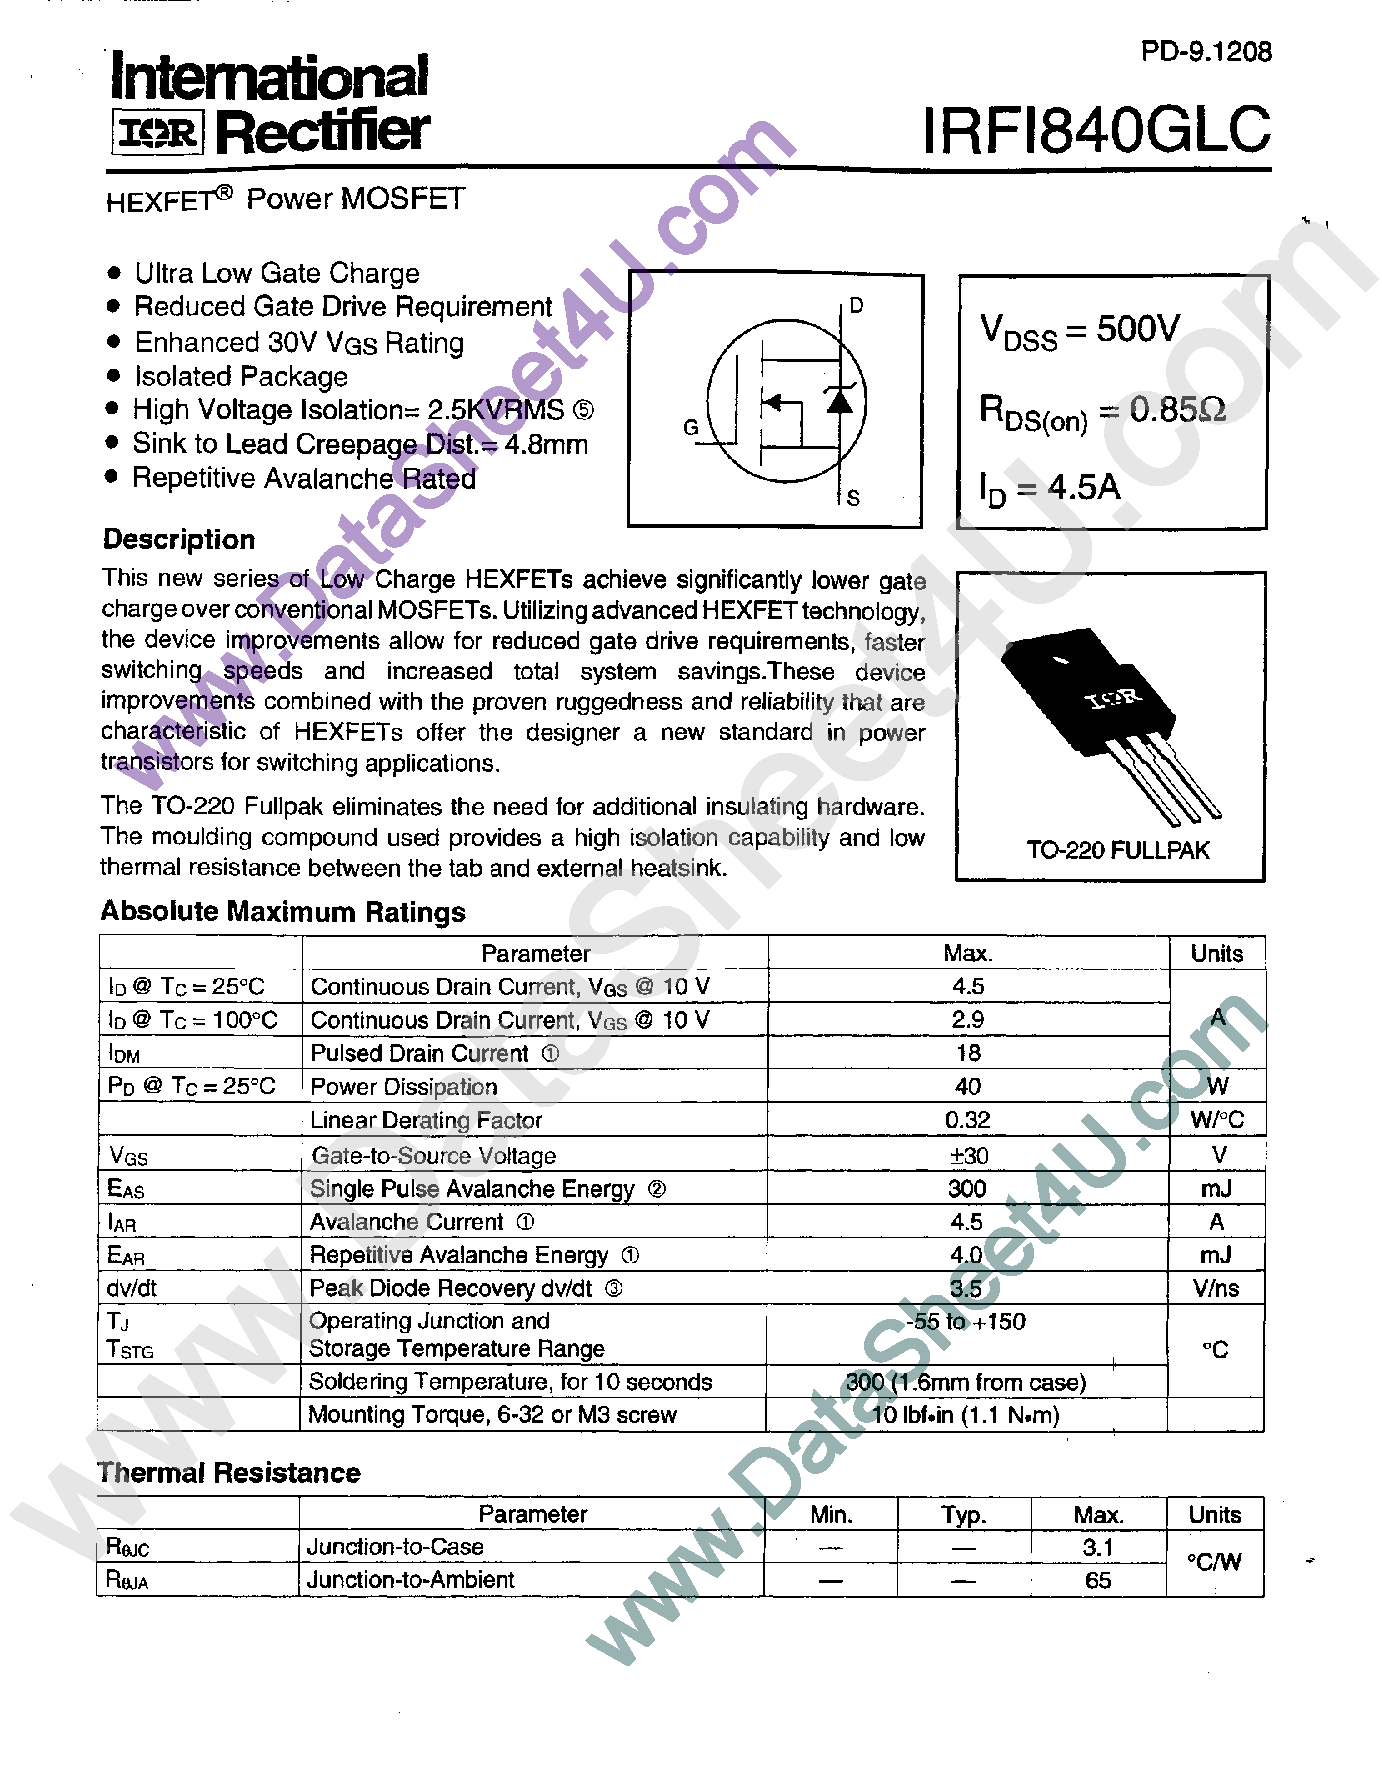 Datasheet IRF1840GLC - HexFET Power MOSFET page 1